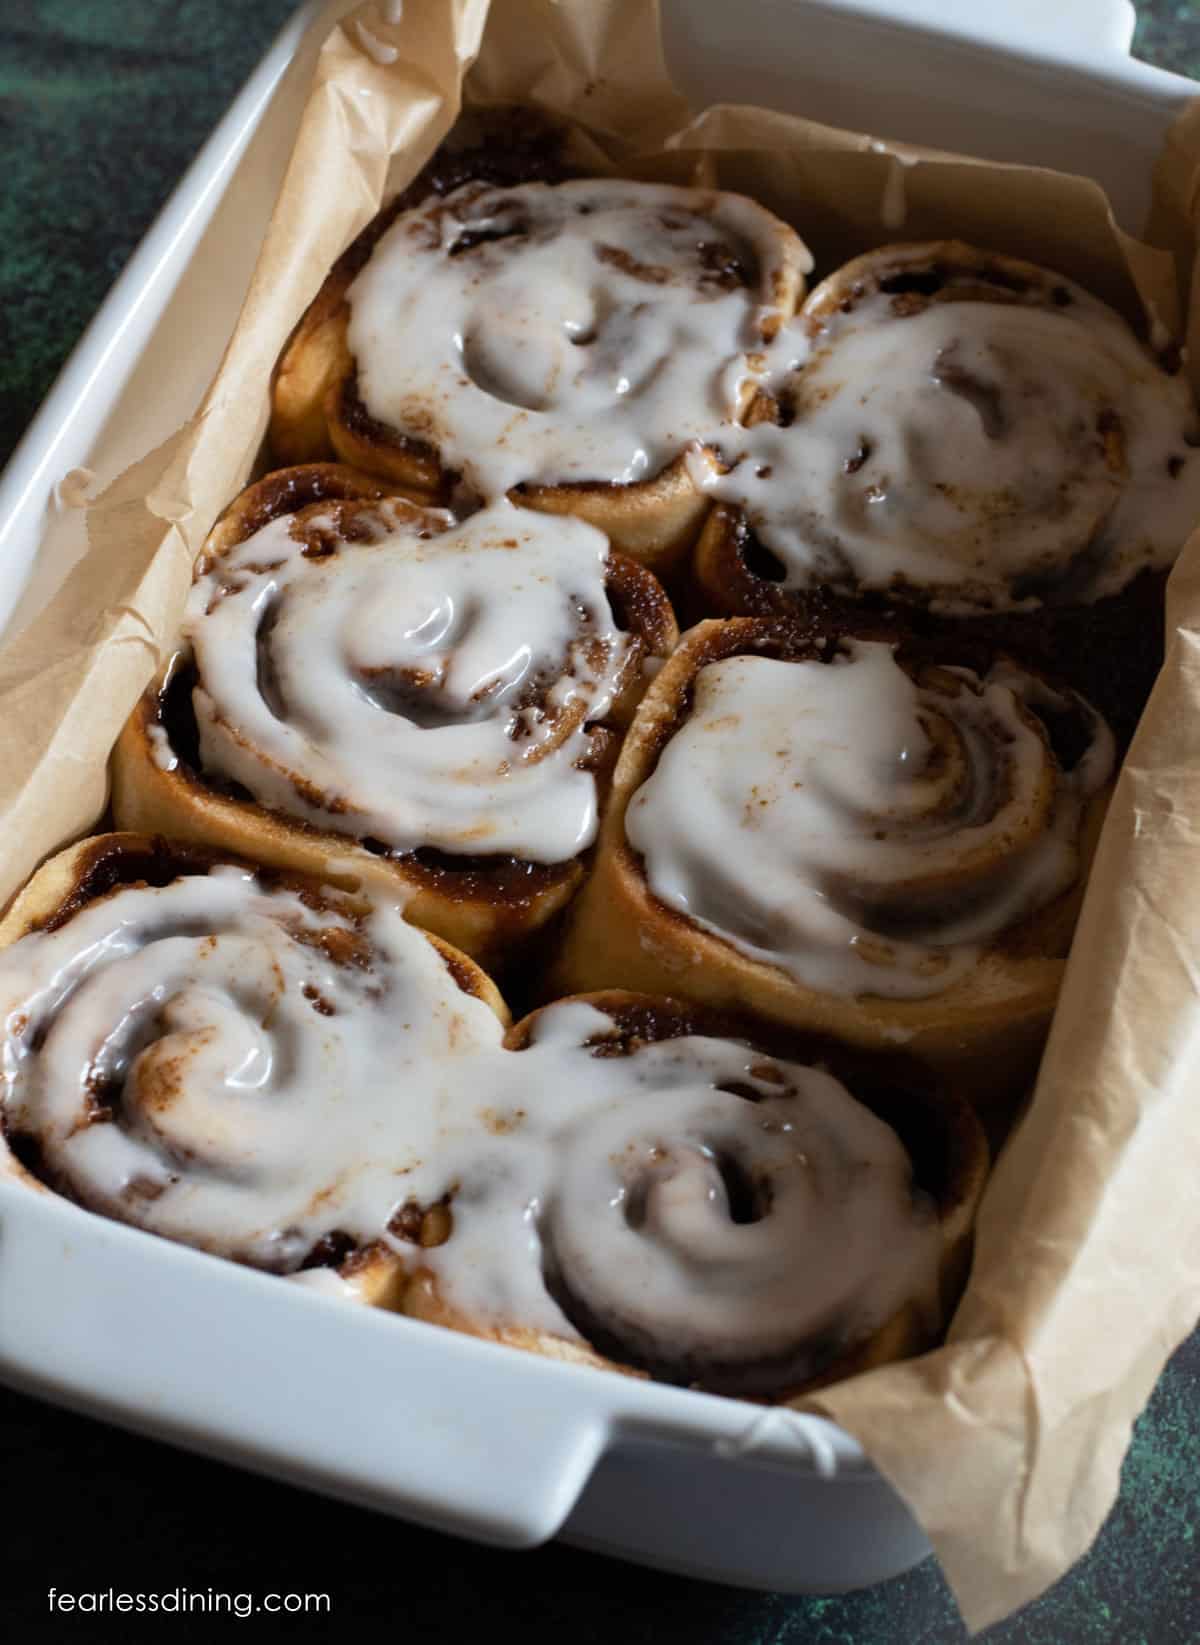 Baked gluten free gingerbread cinnamon rolls with icing.